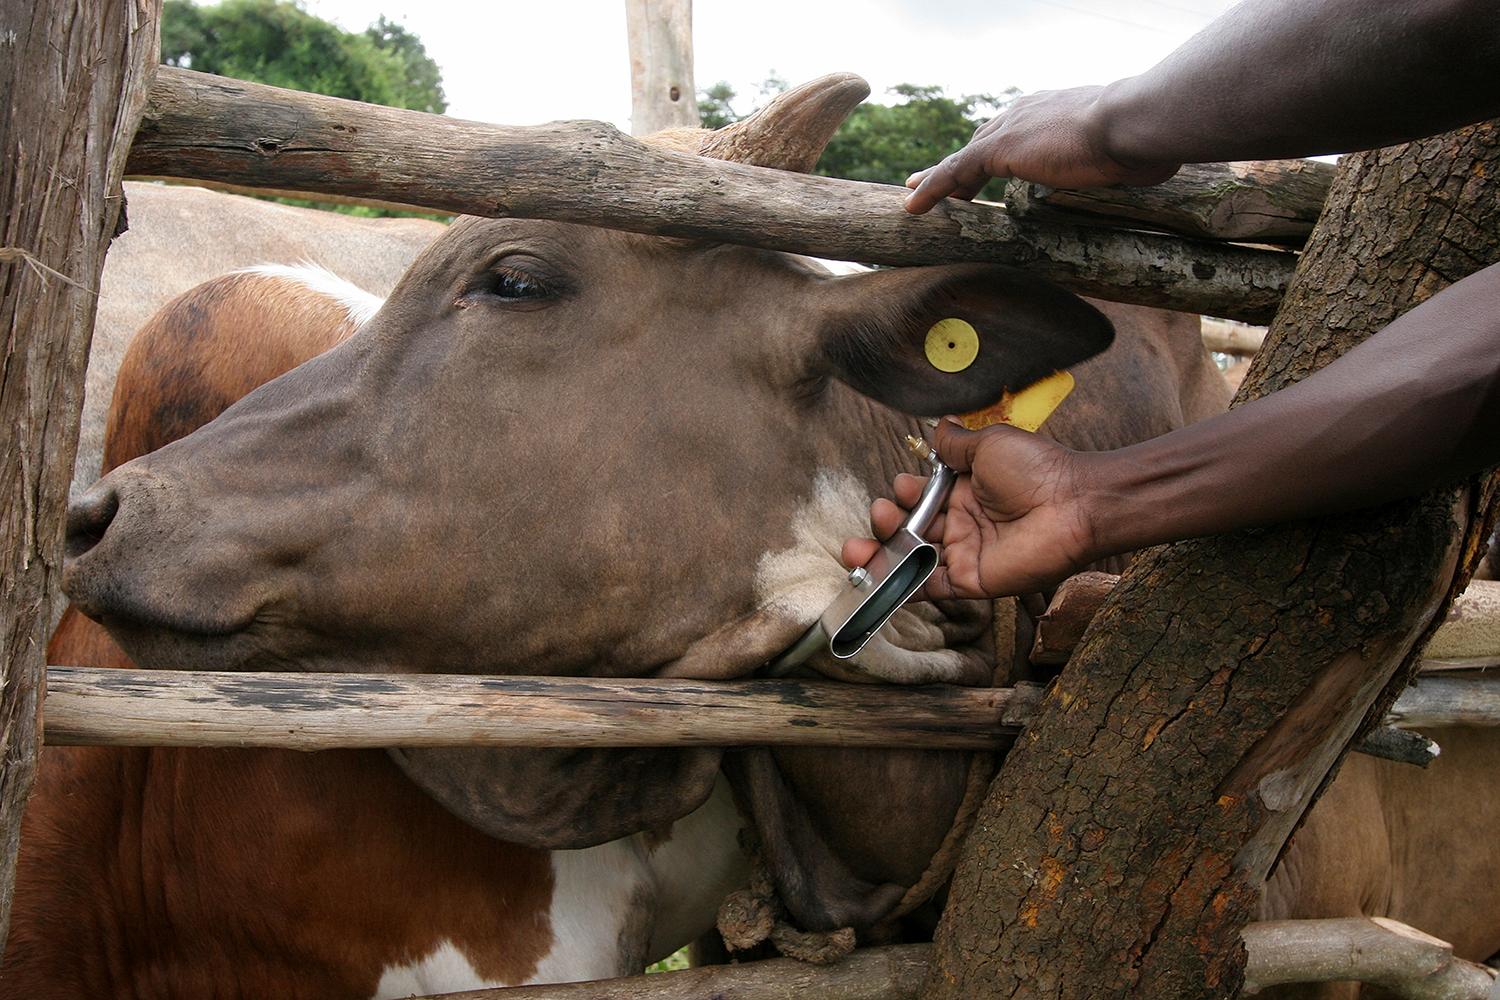 The metal casing suspended from this cow's collar contains a chemical mixture that repels tstse flies.